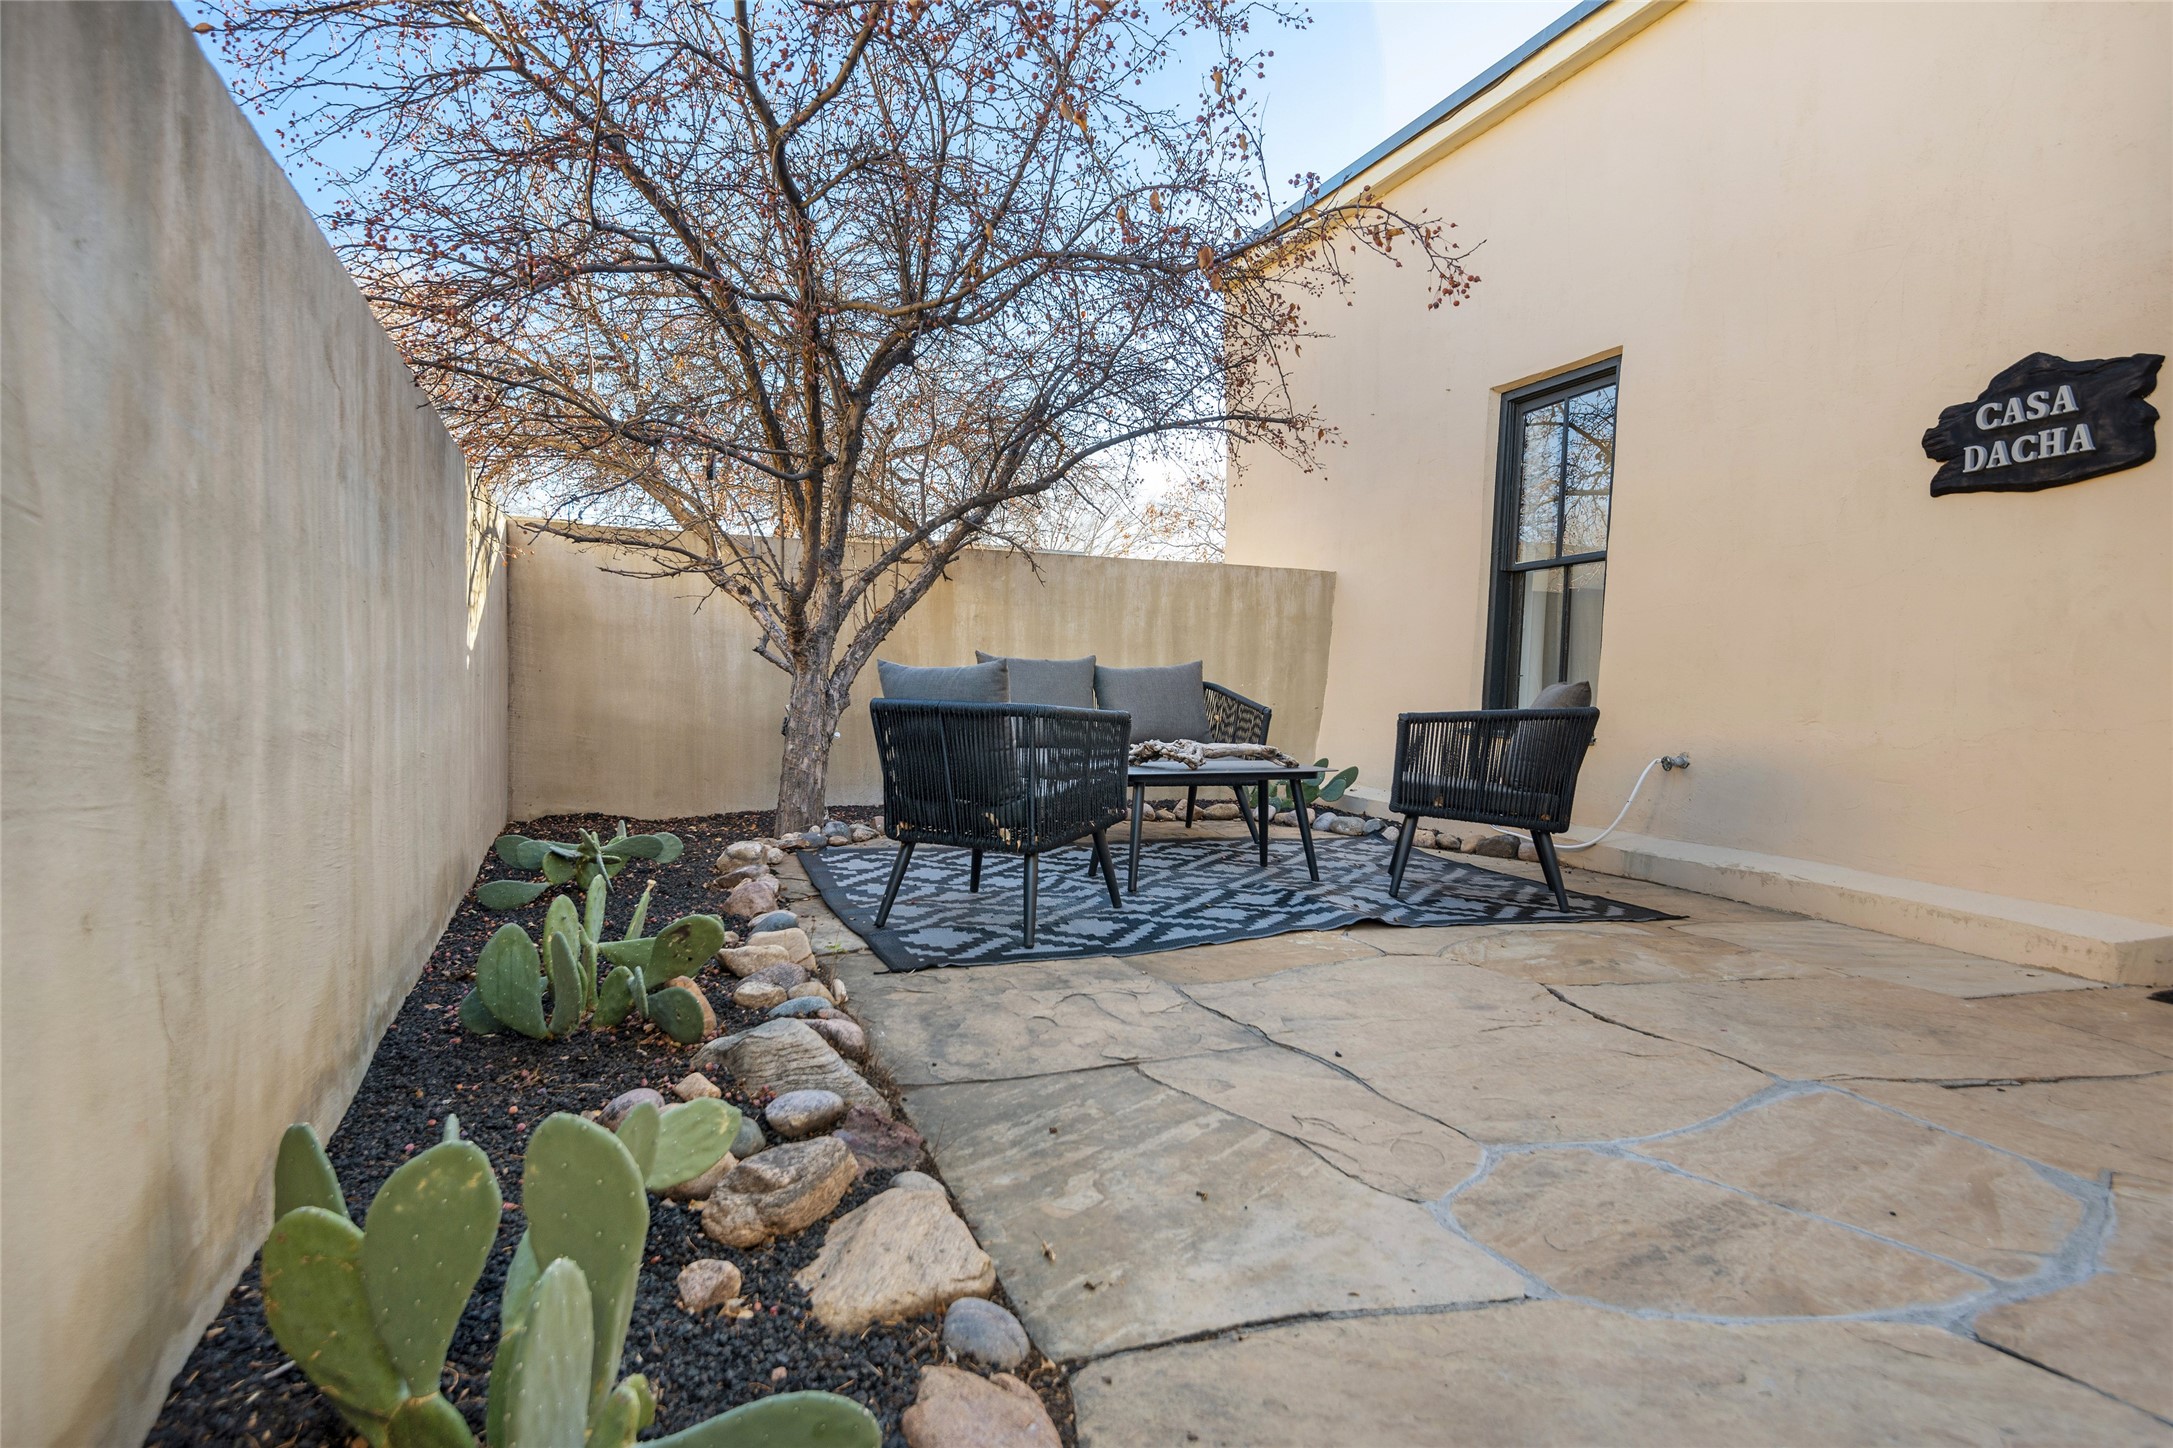 824 Dunlap Street A, Santa Fe, New Mexico 87501, 2 Bedrooms Bedrooms, ,1 BathroomBathrooms,Residential,For Sale,824 Dunlap Street A,202234174